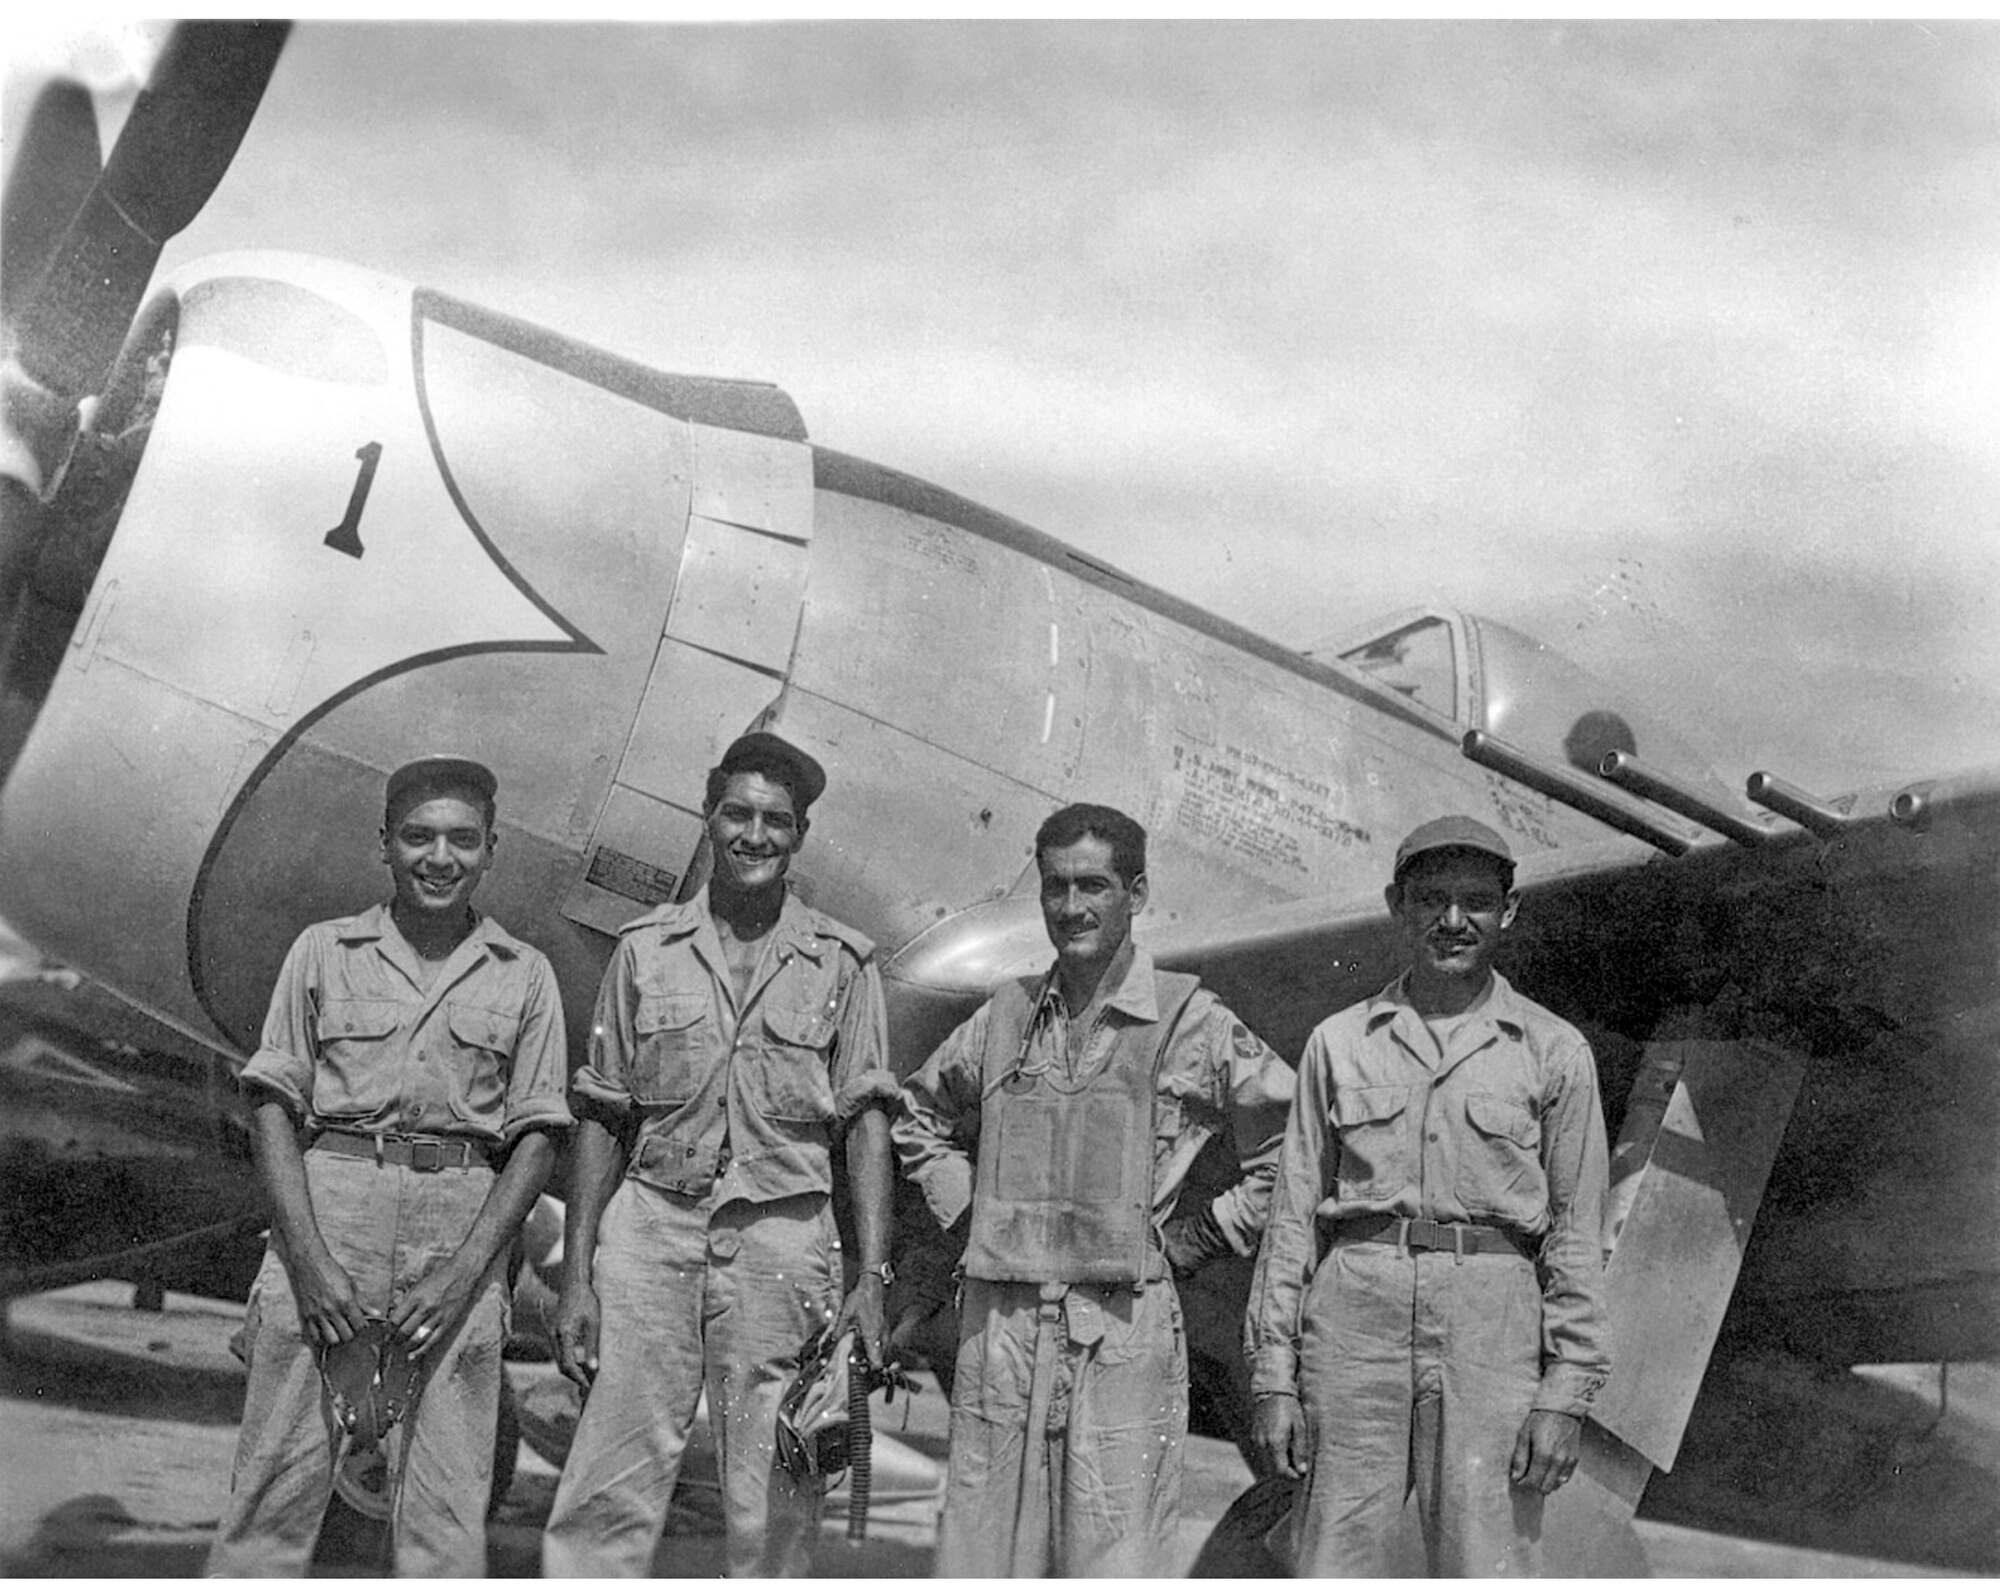 Mexican air force Capt. Radames Gaxiola Andrade stands in front of his P-47D with his maintenance team after he returned from a combat mission.  Captain Andrade was assigned to the Mexican air force's Escuadron 201. Members of the Escuadron 201 fought alongside U.S. forces during World War II. (Courtesy photo)